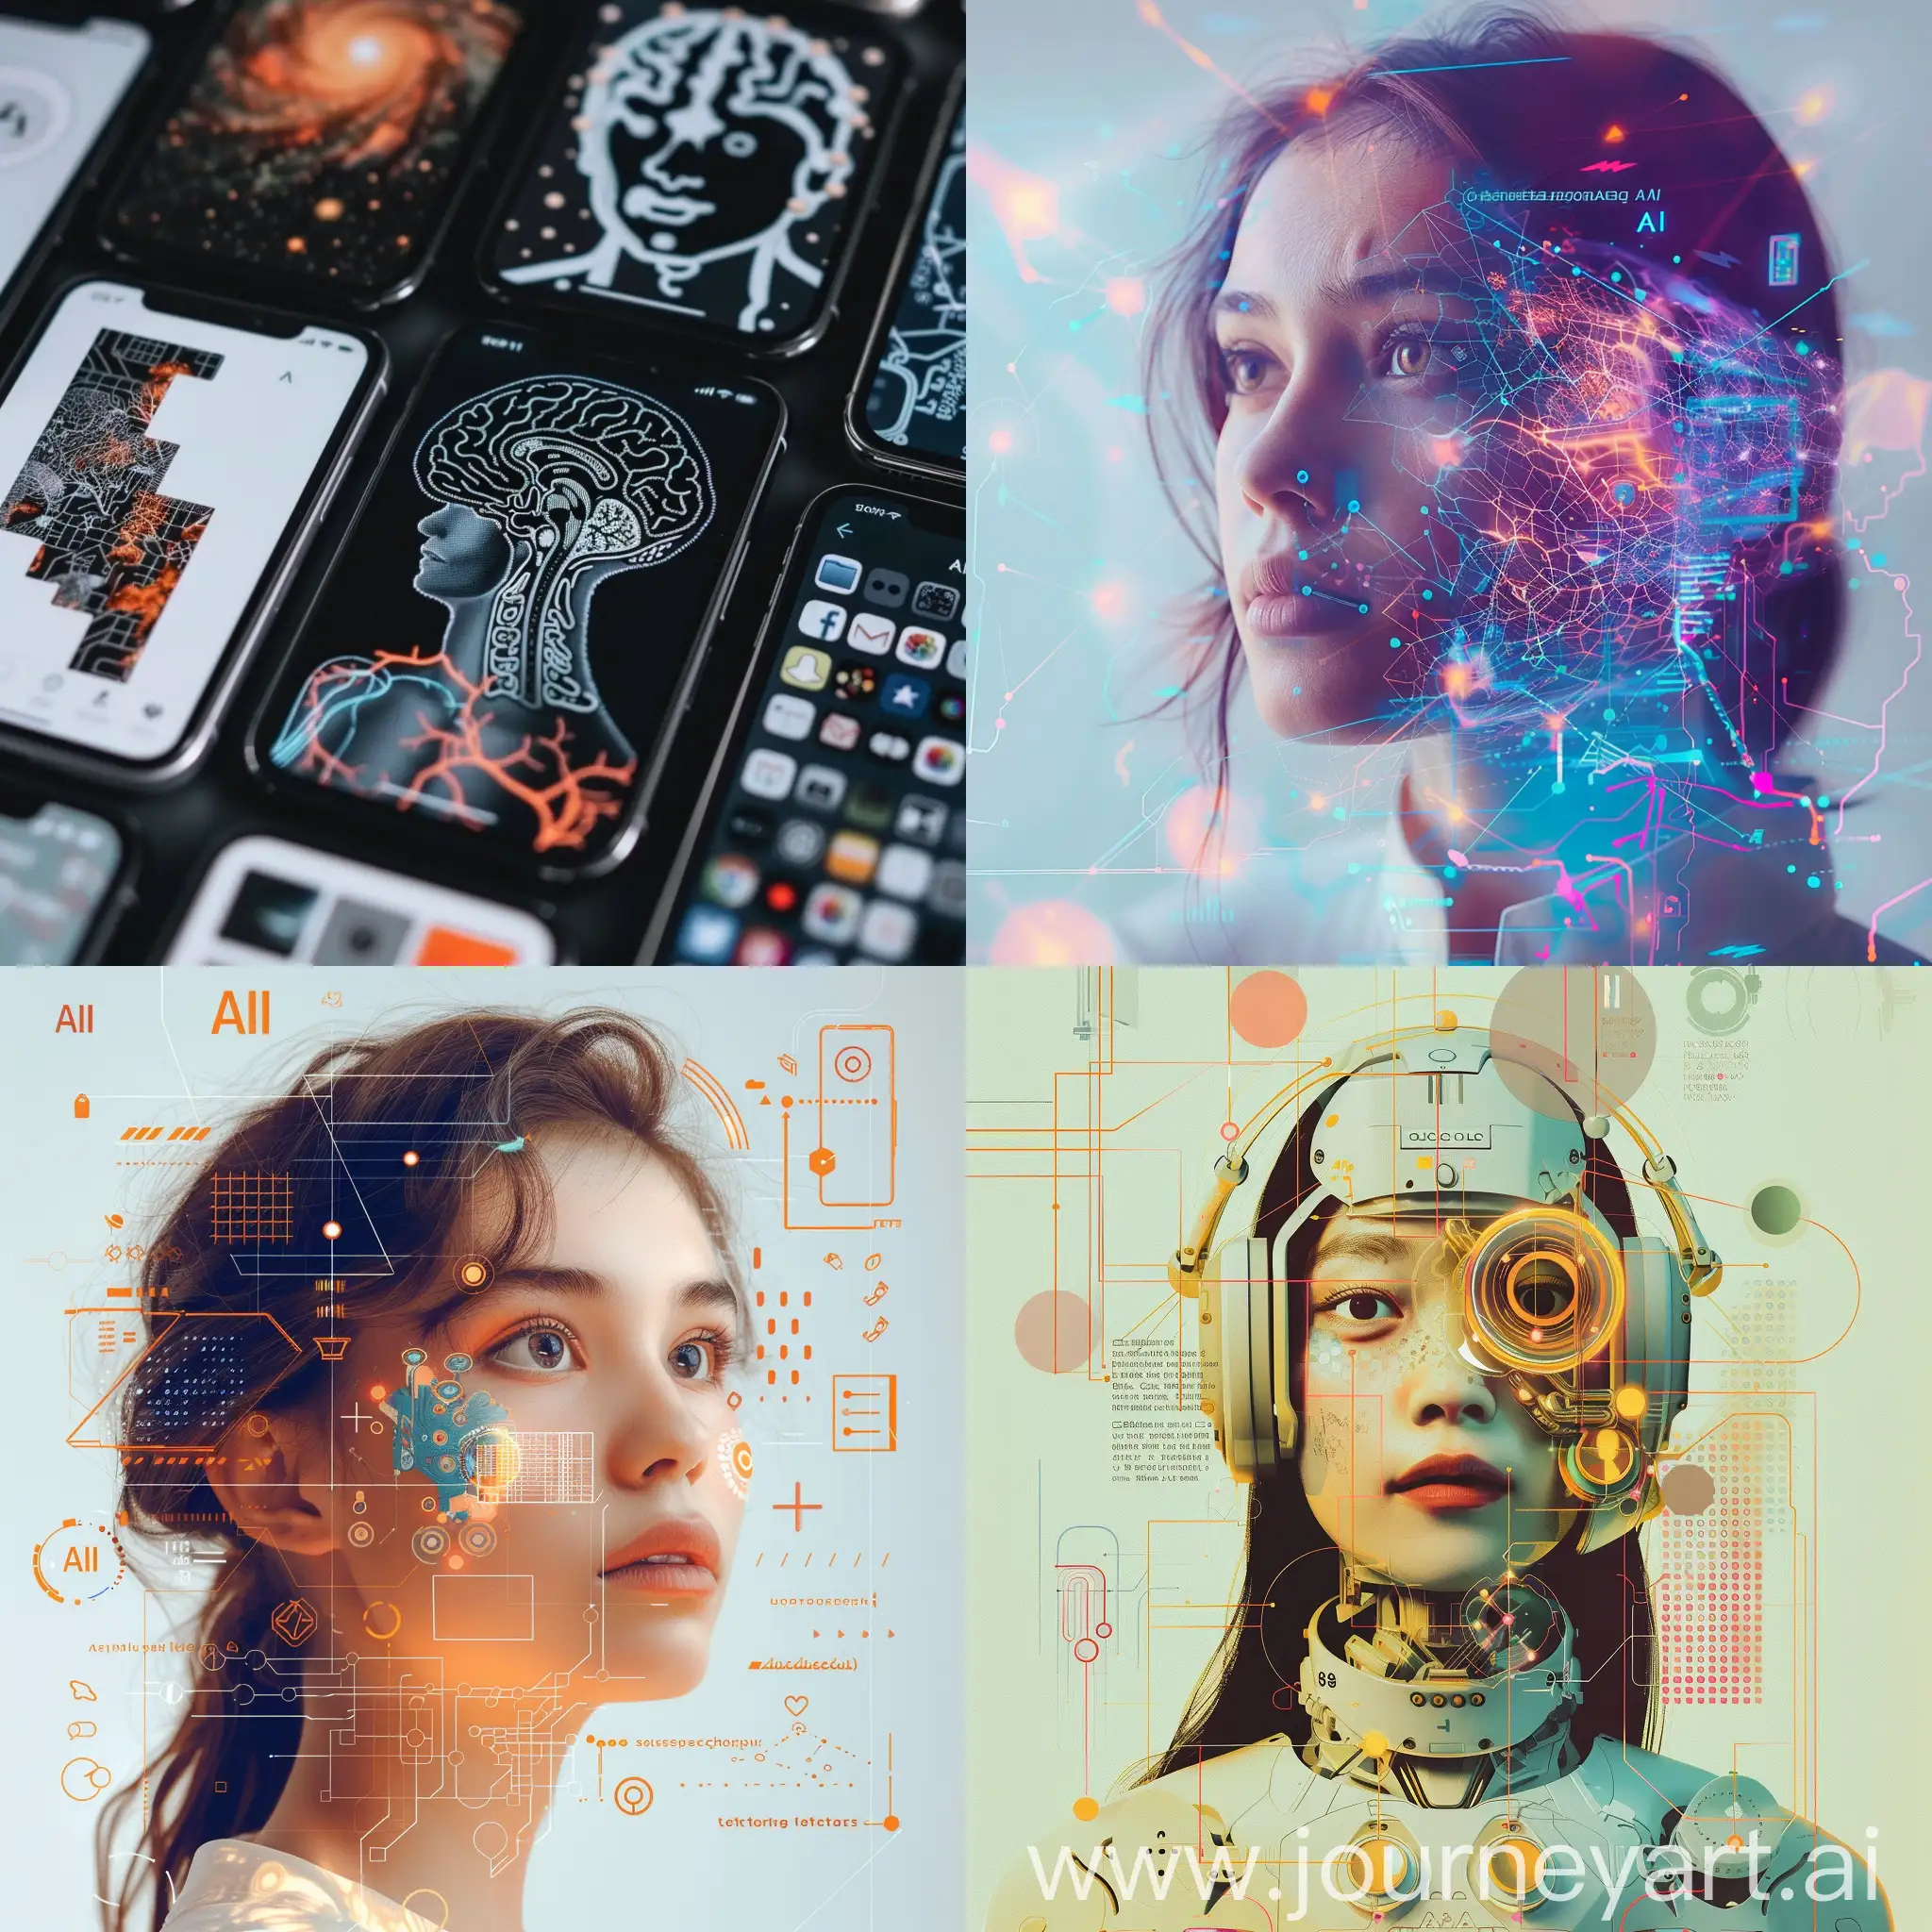 Relevance to AI Content: The theme should align with the content of your AI-related Instagram account. For instance, if your account focuses on AI technology advancements, the theme should reflect topics like machine learning, neural networks, or robotics.

Color Scheme and Patterns: Choose colors and patterns that resonate with the identity and needs of your AI brand. These patterns could be inspired by your logo, website, or other branding elements.

Use of Filters and Effects: Incorporating filters and effects can add allure and sophistication to your post designs. These effects should complement the visual identity of your AI brand.

Unique Fonts: Selecting distinctive fonts that match your brand can differentiate your posts and improve their recognizability.

Appropriate Text: Post text should enhance readability and be grammatically correct. Additionally, it should be relevant to the post content and the needs of your audience.

Engaging Images and Videos: Compelling visuals aligned with your theme can significantly impact engagement with your posts.

Relevant Hashtags: Using hashtags related to AI topics can increase the visibility of your posts and attract more attention.

Effective Layout: Post layouts should be organized and visually appealing, with elements such as headlines, images, text, and hashtags balanced and harmonized.

Image Size and Proportions: Ensure that the images you use are appropriately sized and maintain proper proportions for optimal viewing.

Testing and Improvement: After posting, gather feedback from your audience and make adjustments to your themes and content based on that feedback to continually enhance and progress your AI brand's presence on Instagram